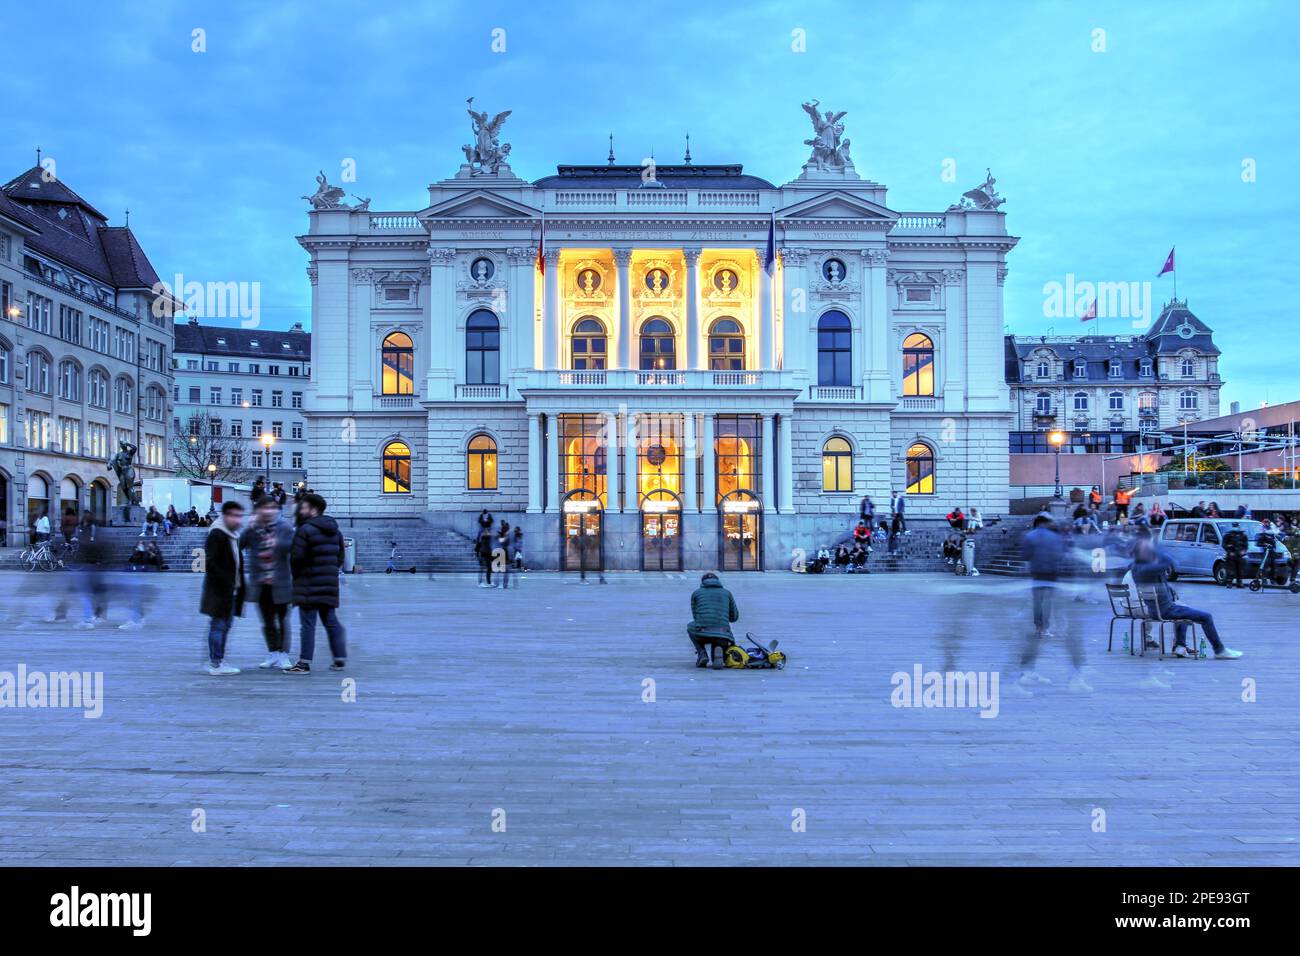 Sechseläutenplatz with Zürich Opera House 1891 neo-classical building. The scene captures an evening during the Covid Pandemic in April 2021, when, du Stock Photo